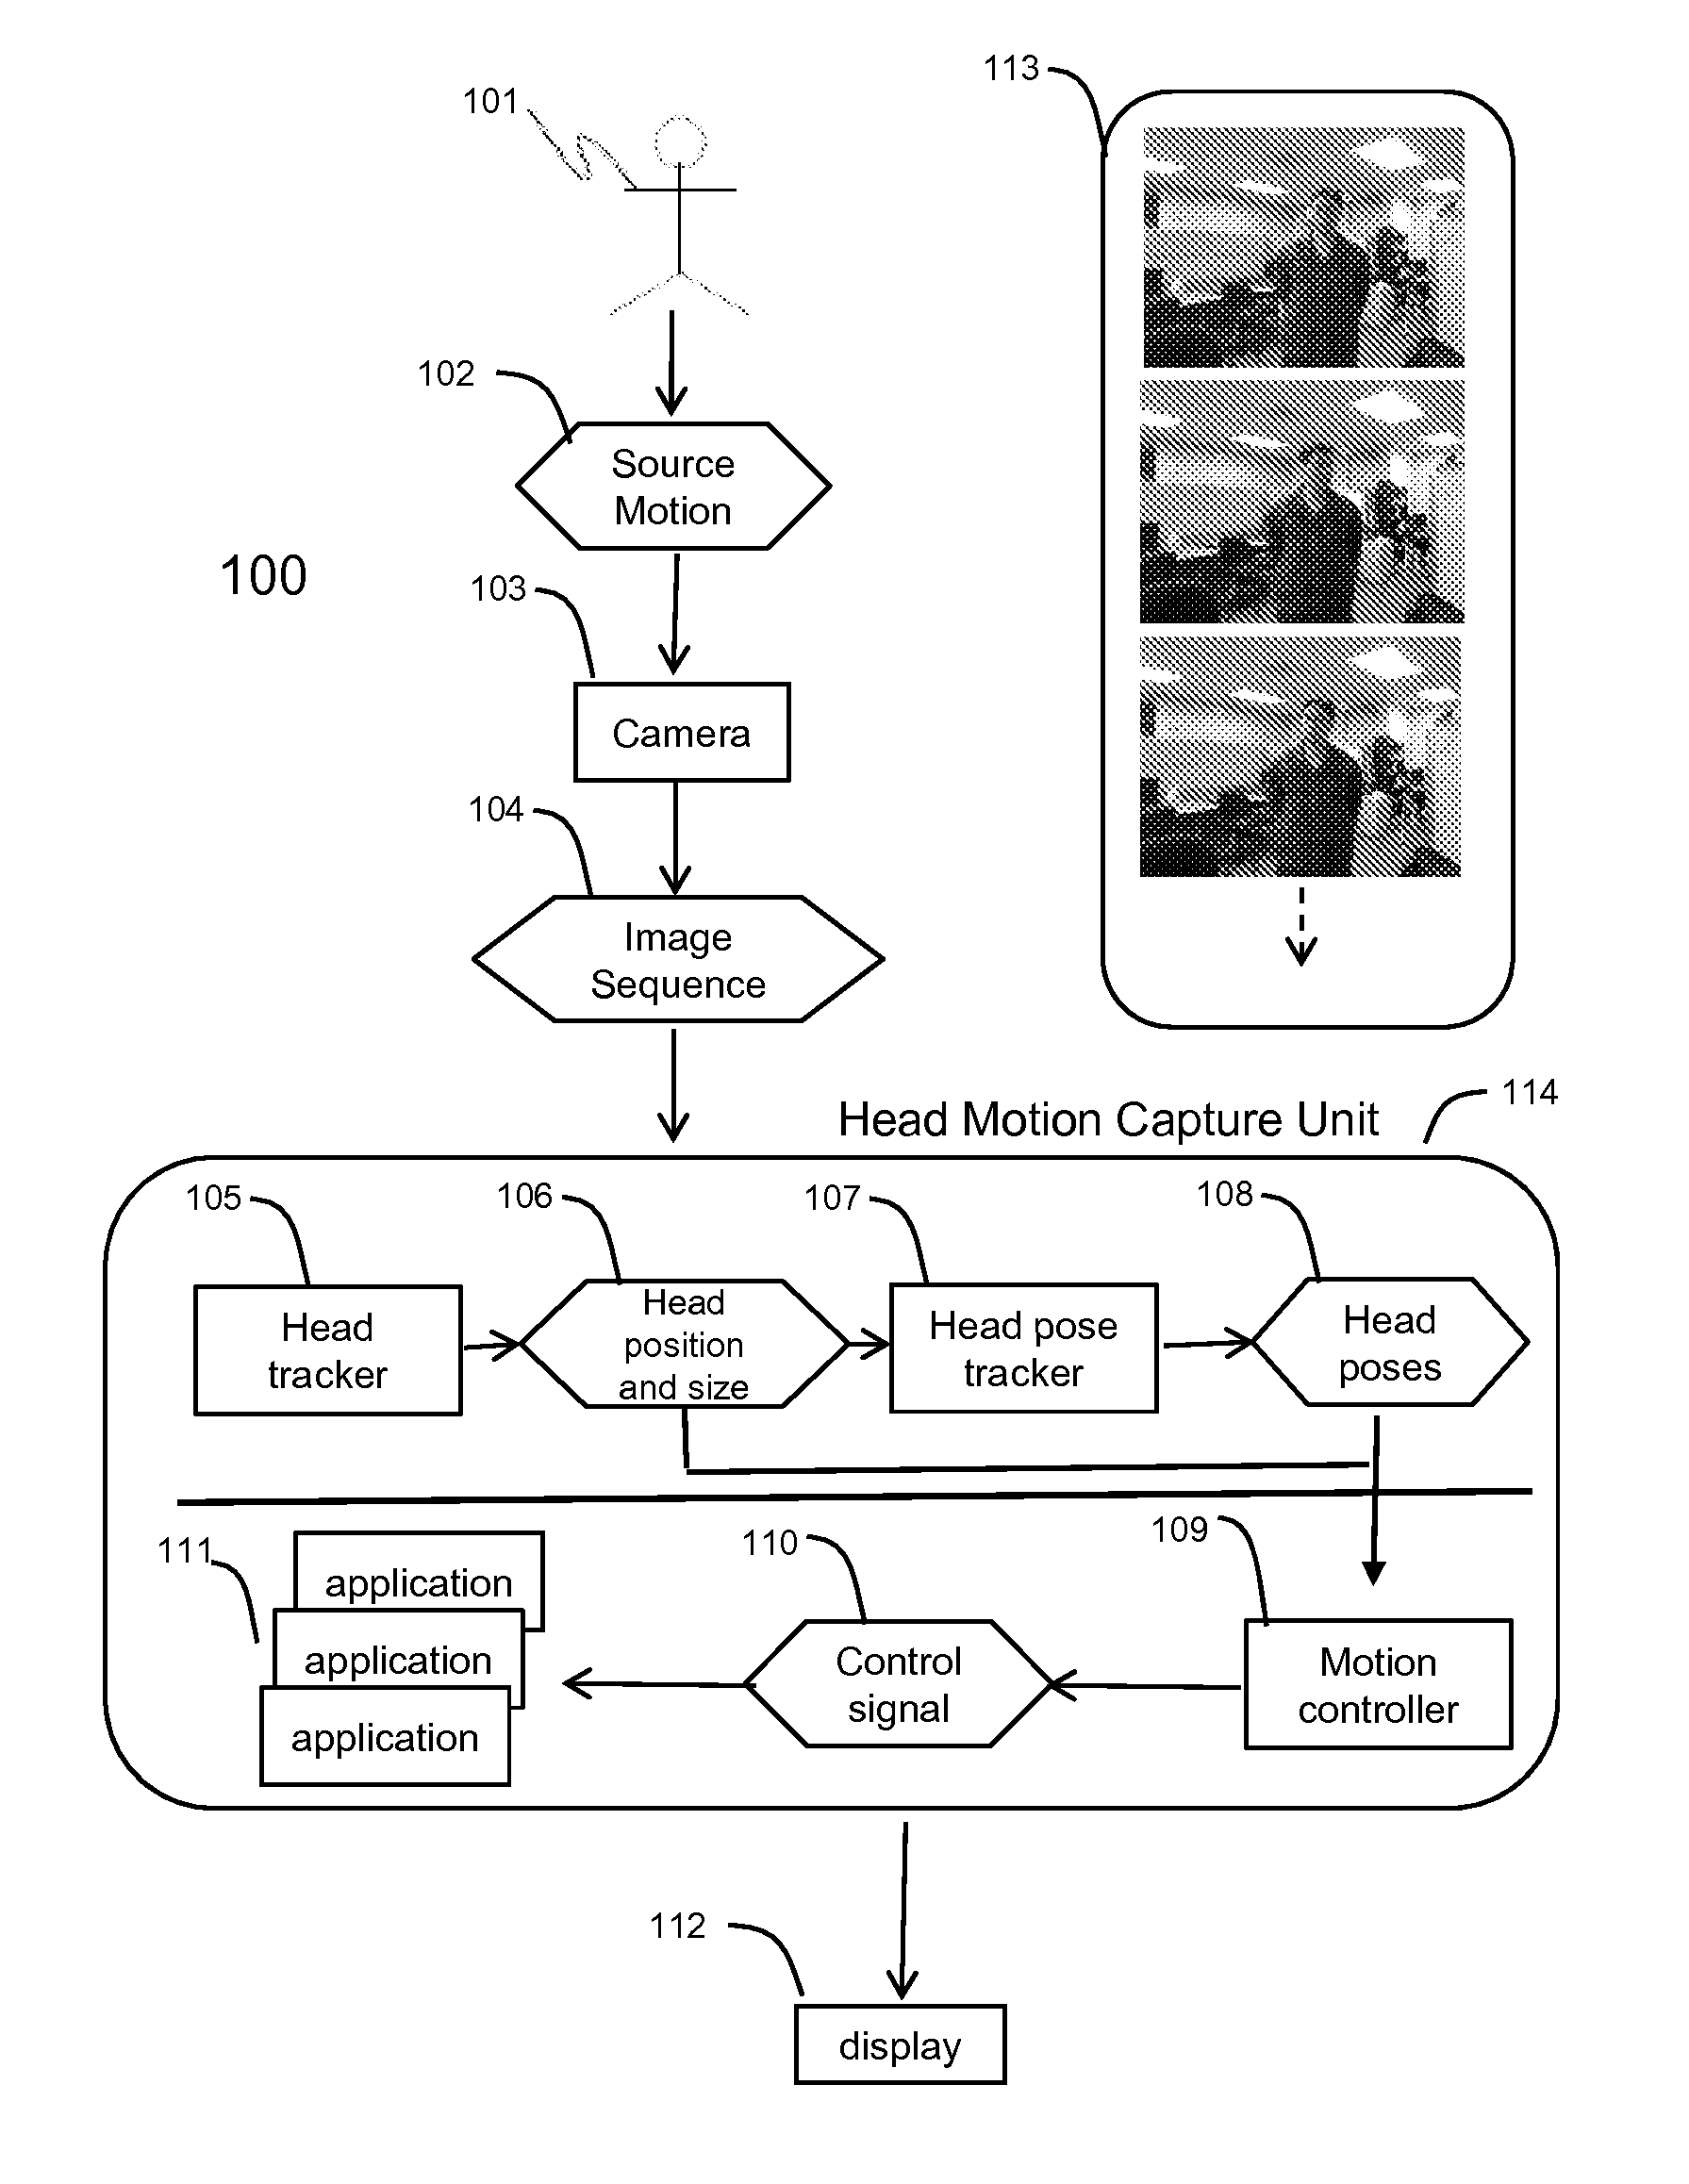 Method and system for head tracking and pose estimation